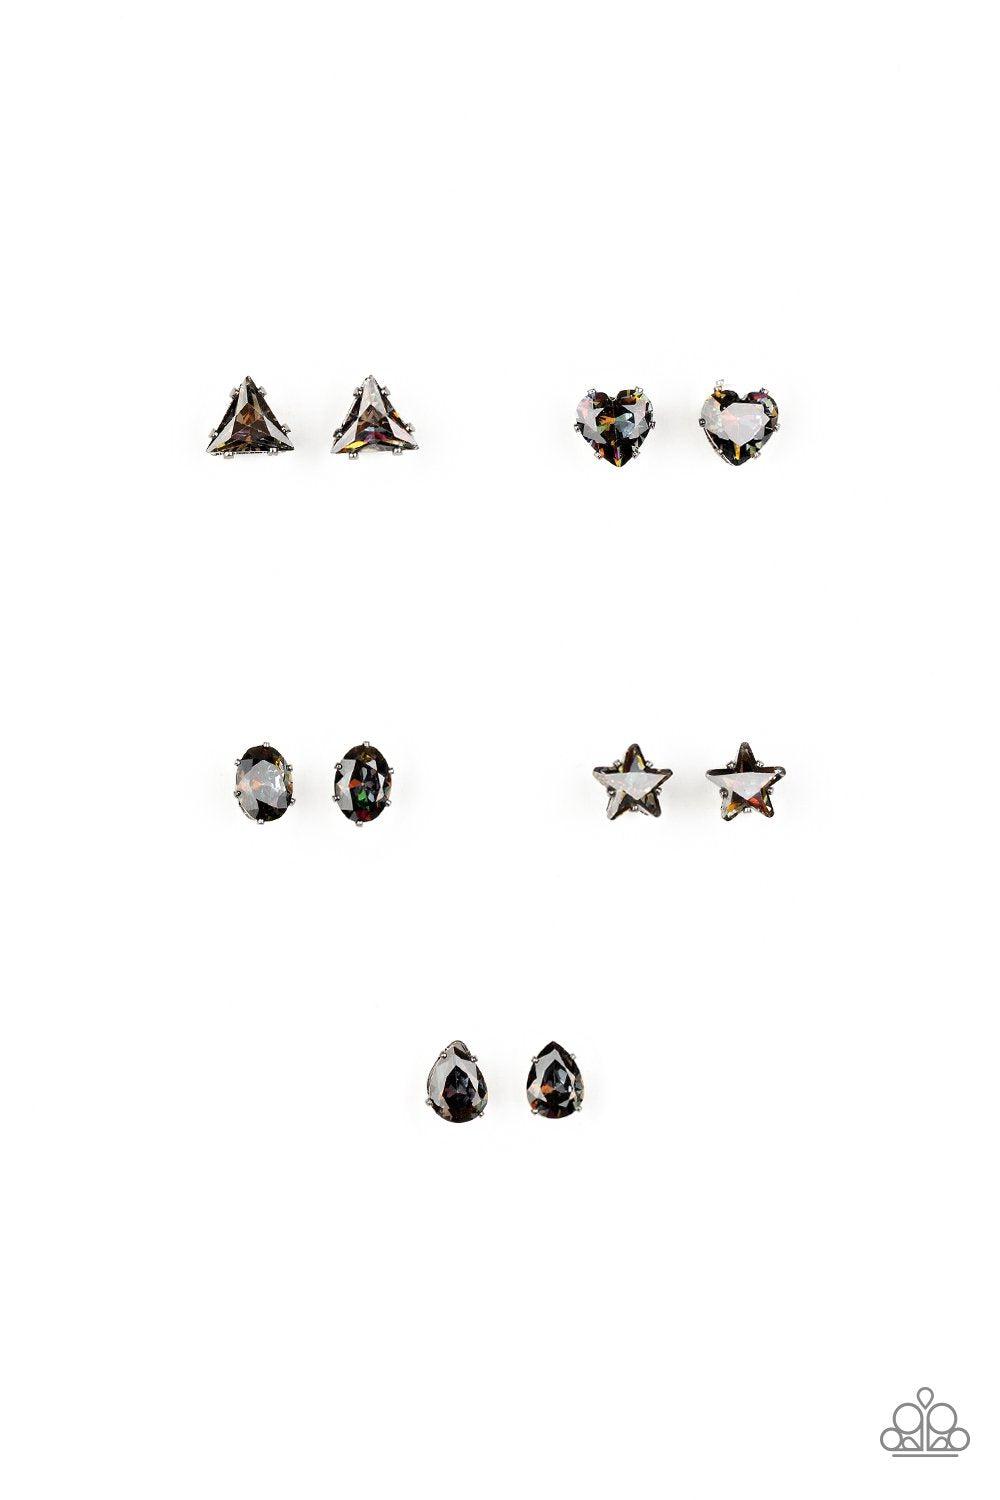 Starlet Shimmer Children&#39;s &quot;Oil Spill&quot; Rhinestone Post Earrings v2 - Paparazzi Accessories (set of 5 pairs) - Full set -CarasShop.com - $5 Jewelry by Cara Jewels